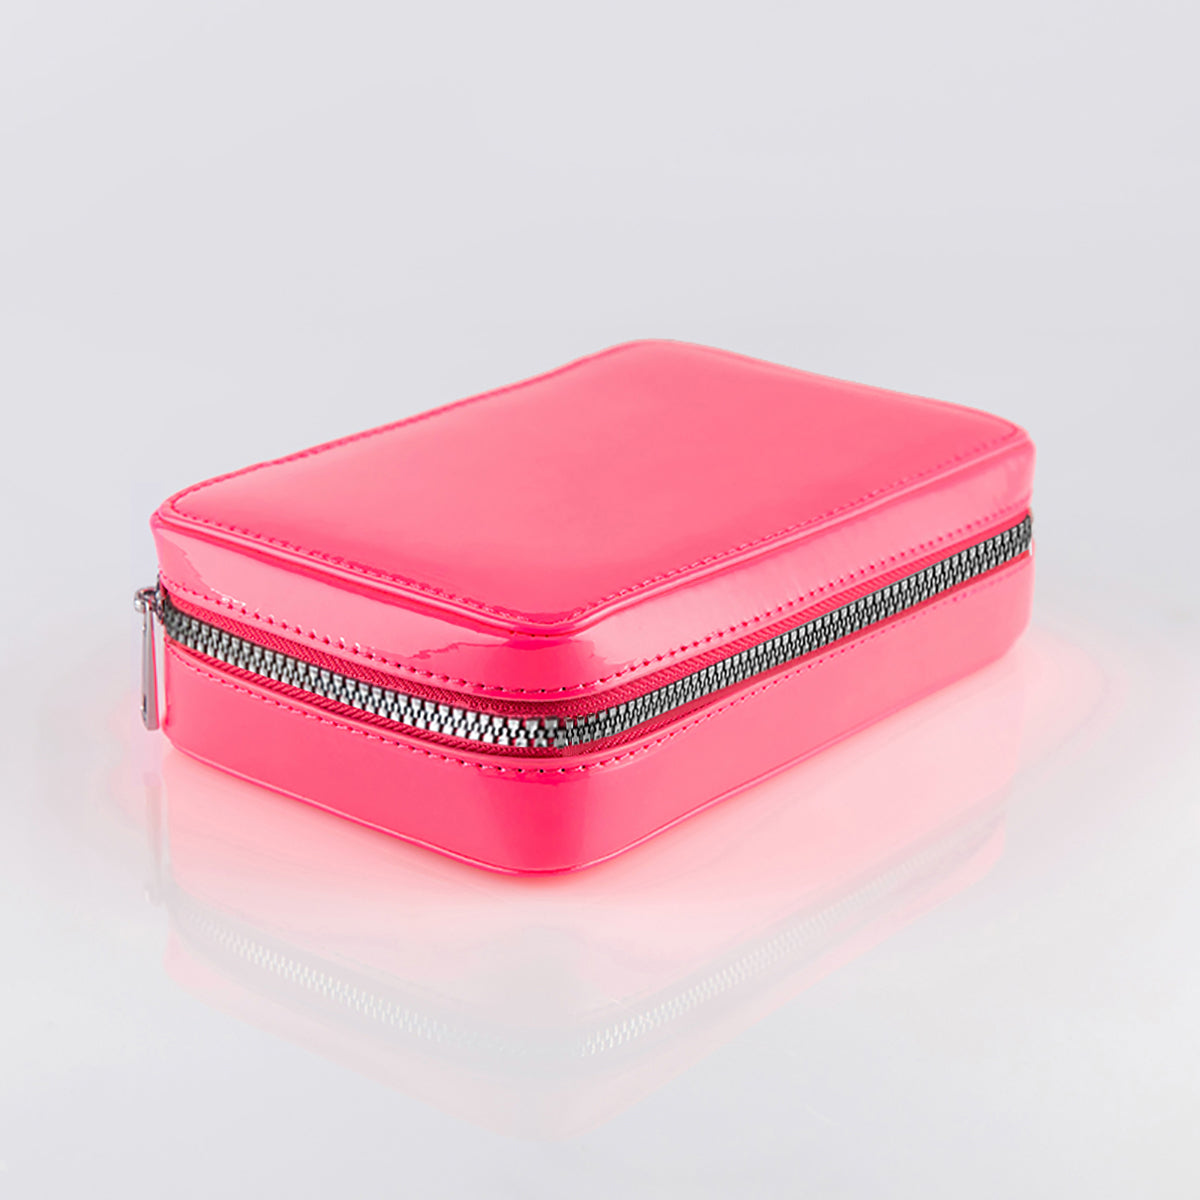 The fold out case in hot pink with silver zipper